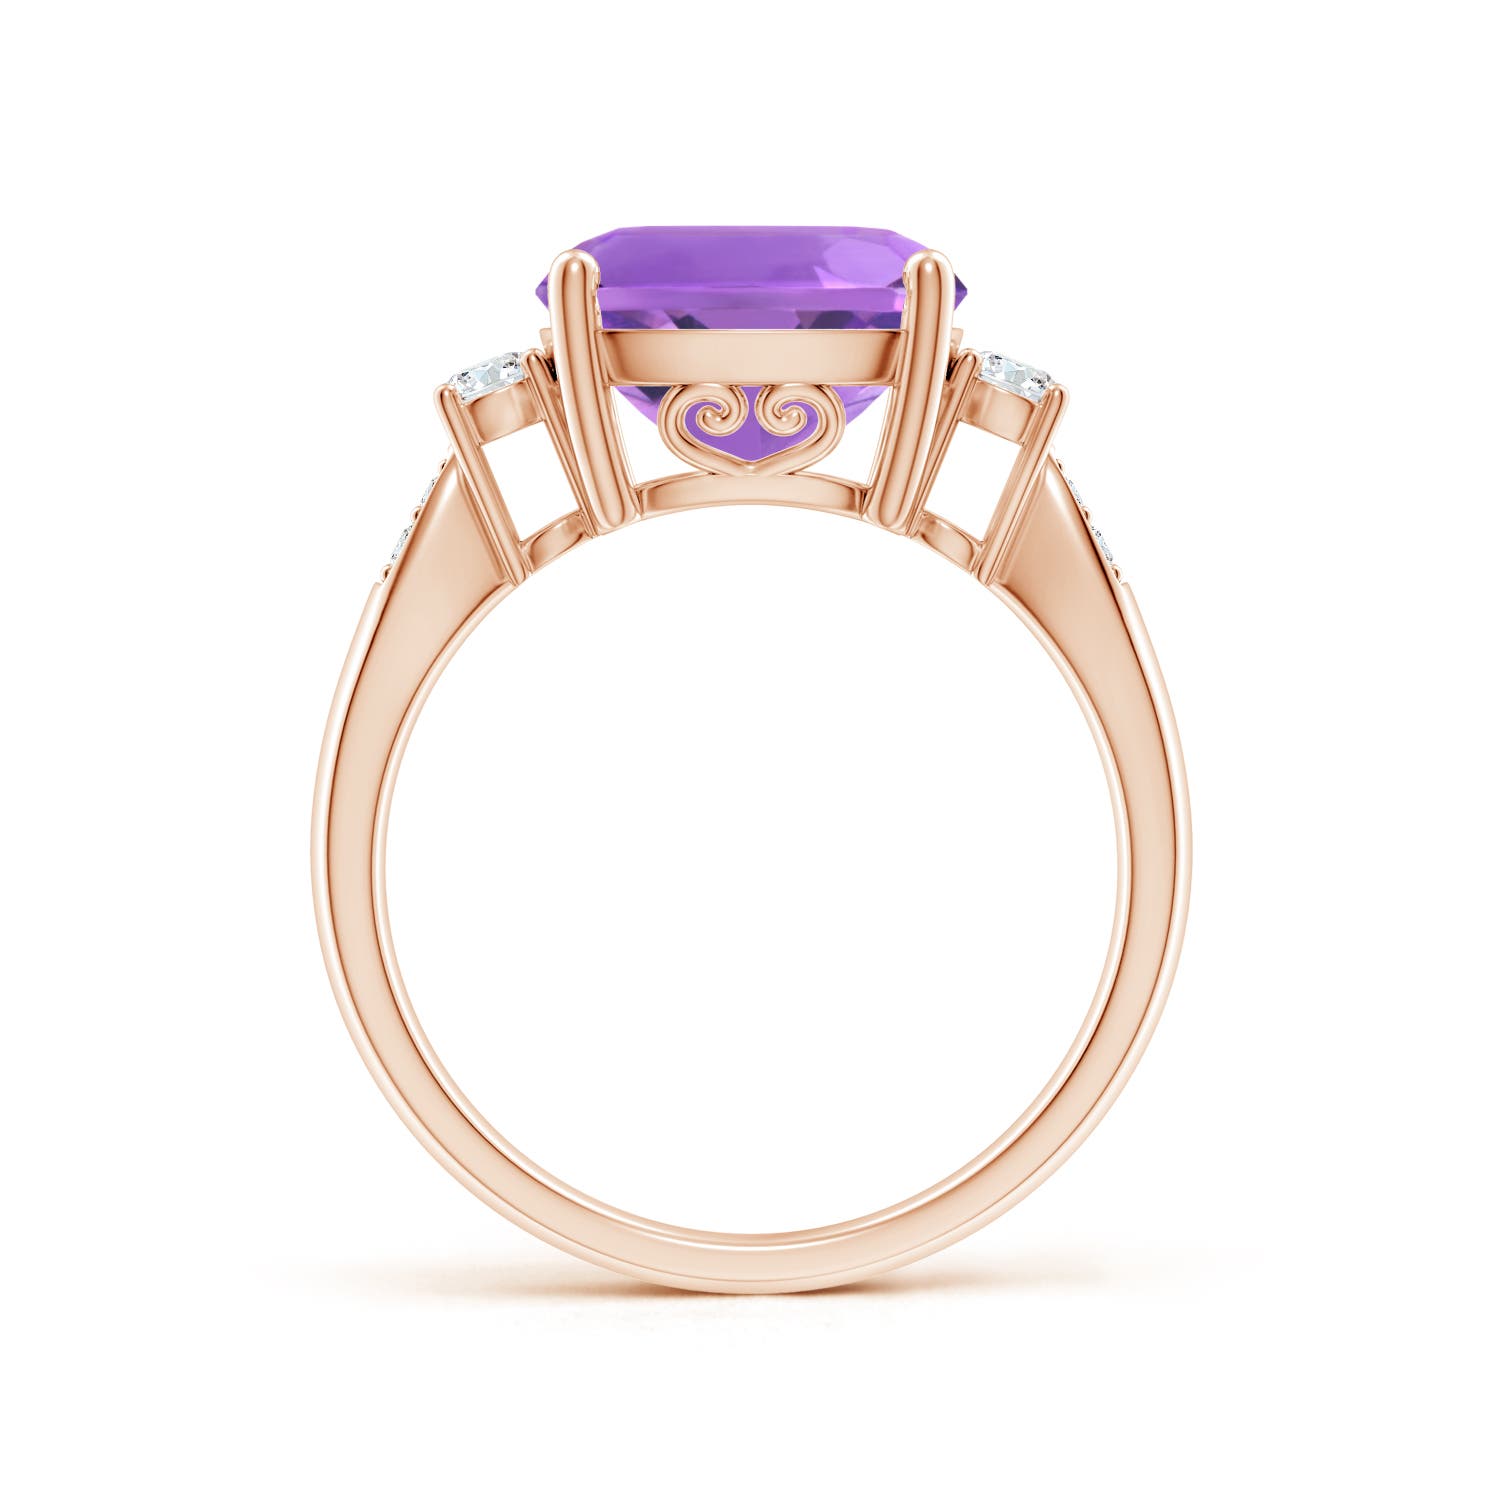 AA - Amethyst / 3.85 CT / 14 KT Rose Gold